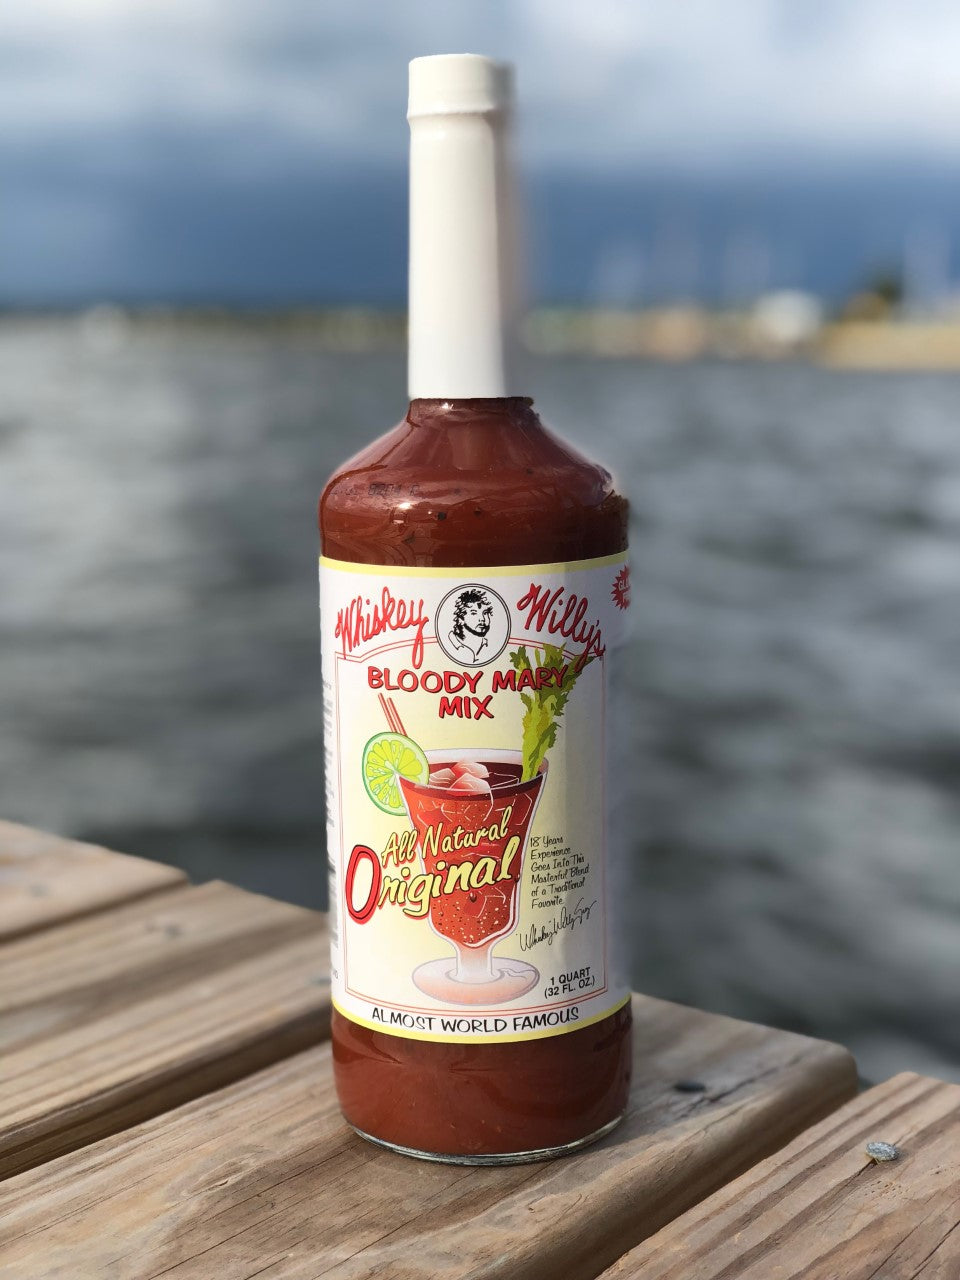 Whiskey Willy's Original Bloody Mary Mix